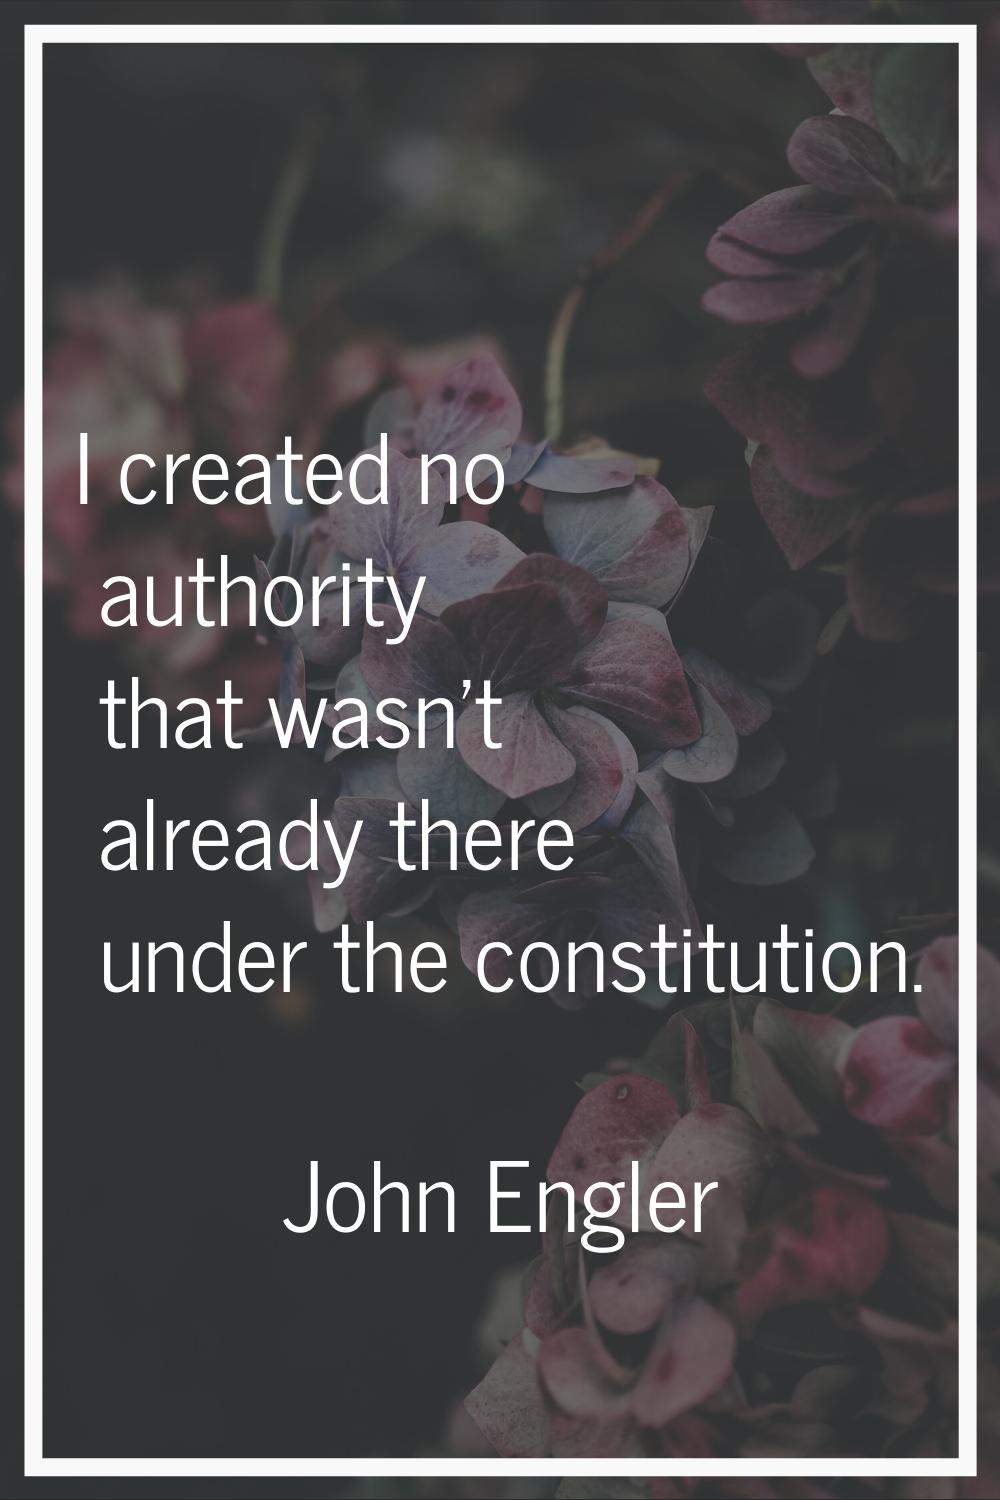 I created no authority that wasn't already there under the constitution.